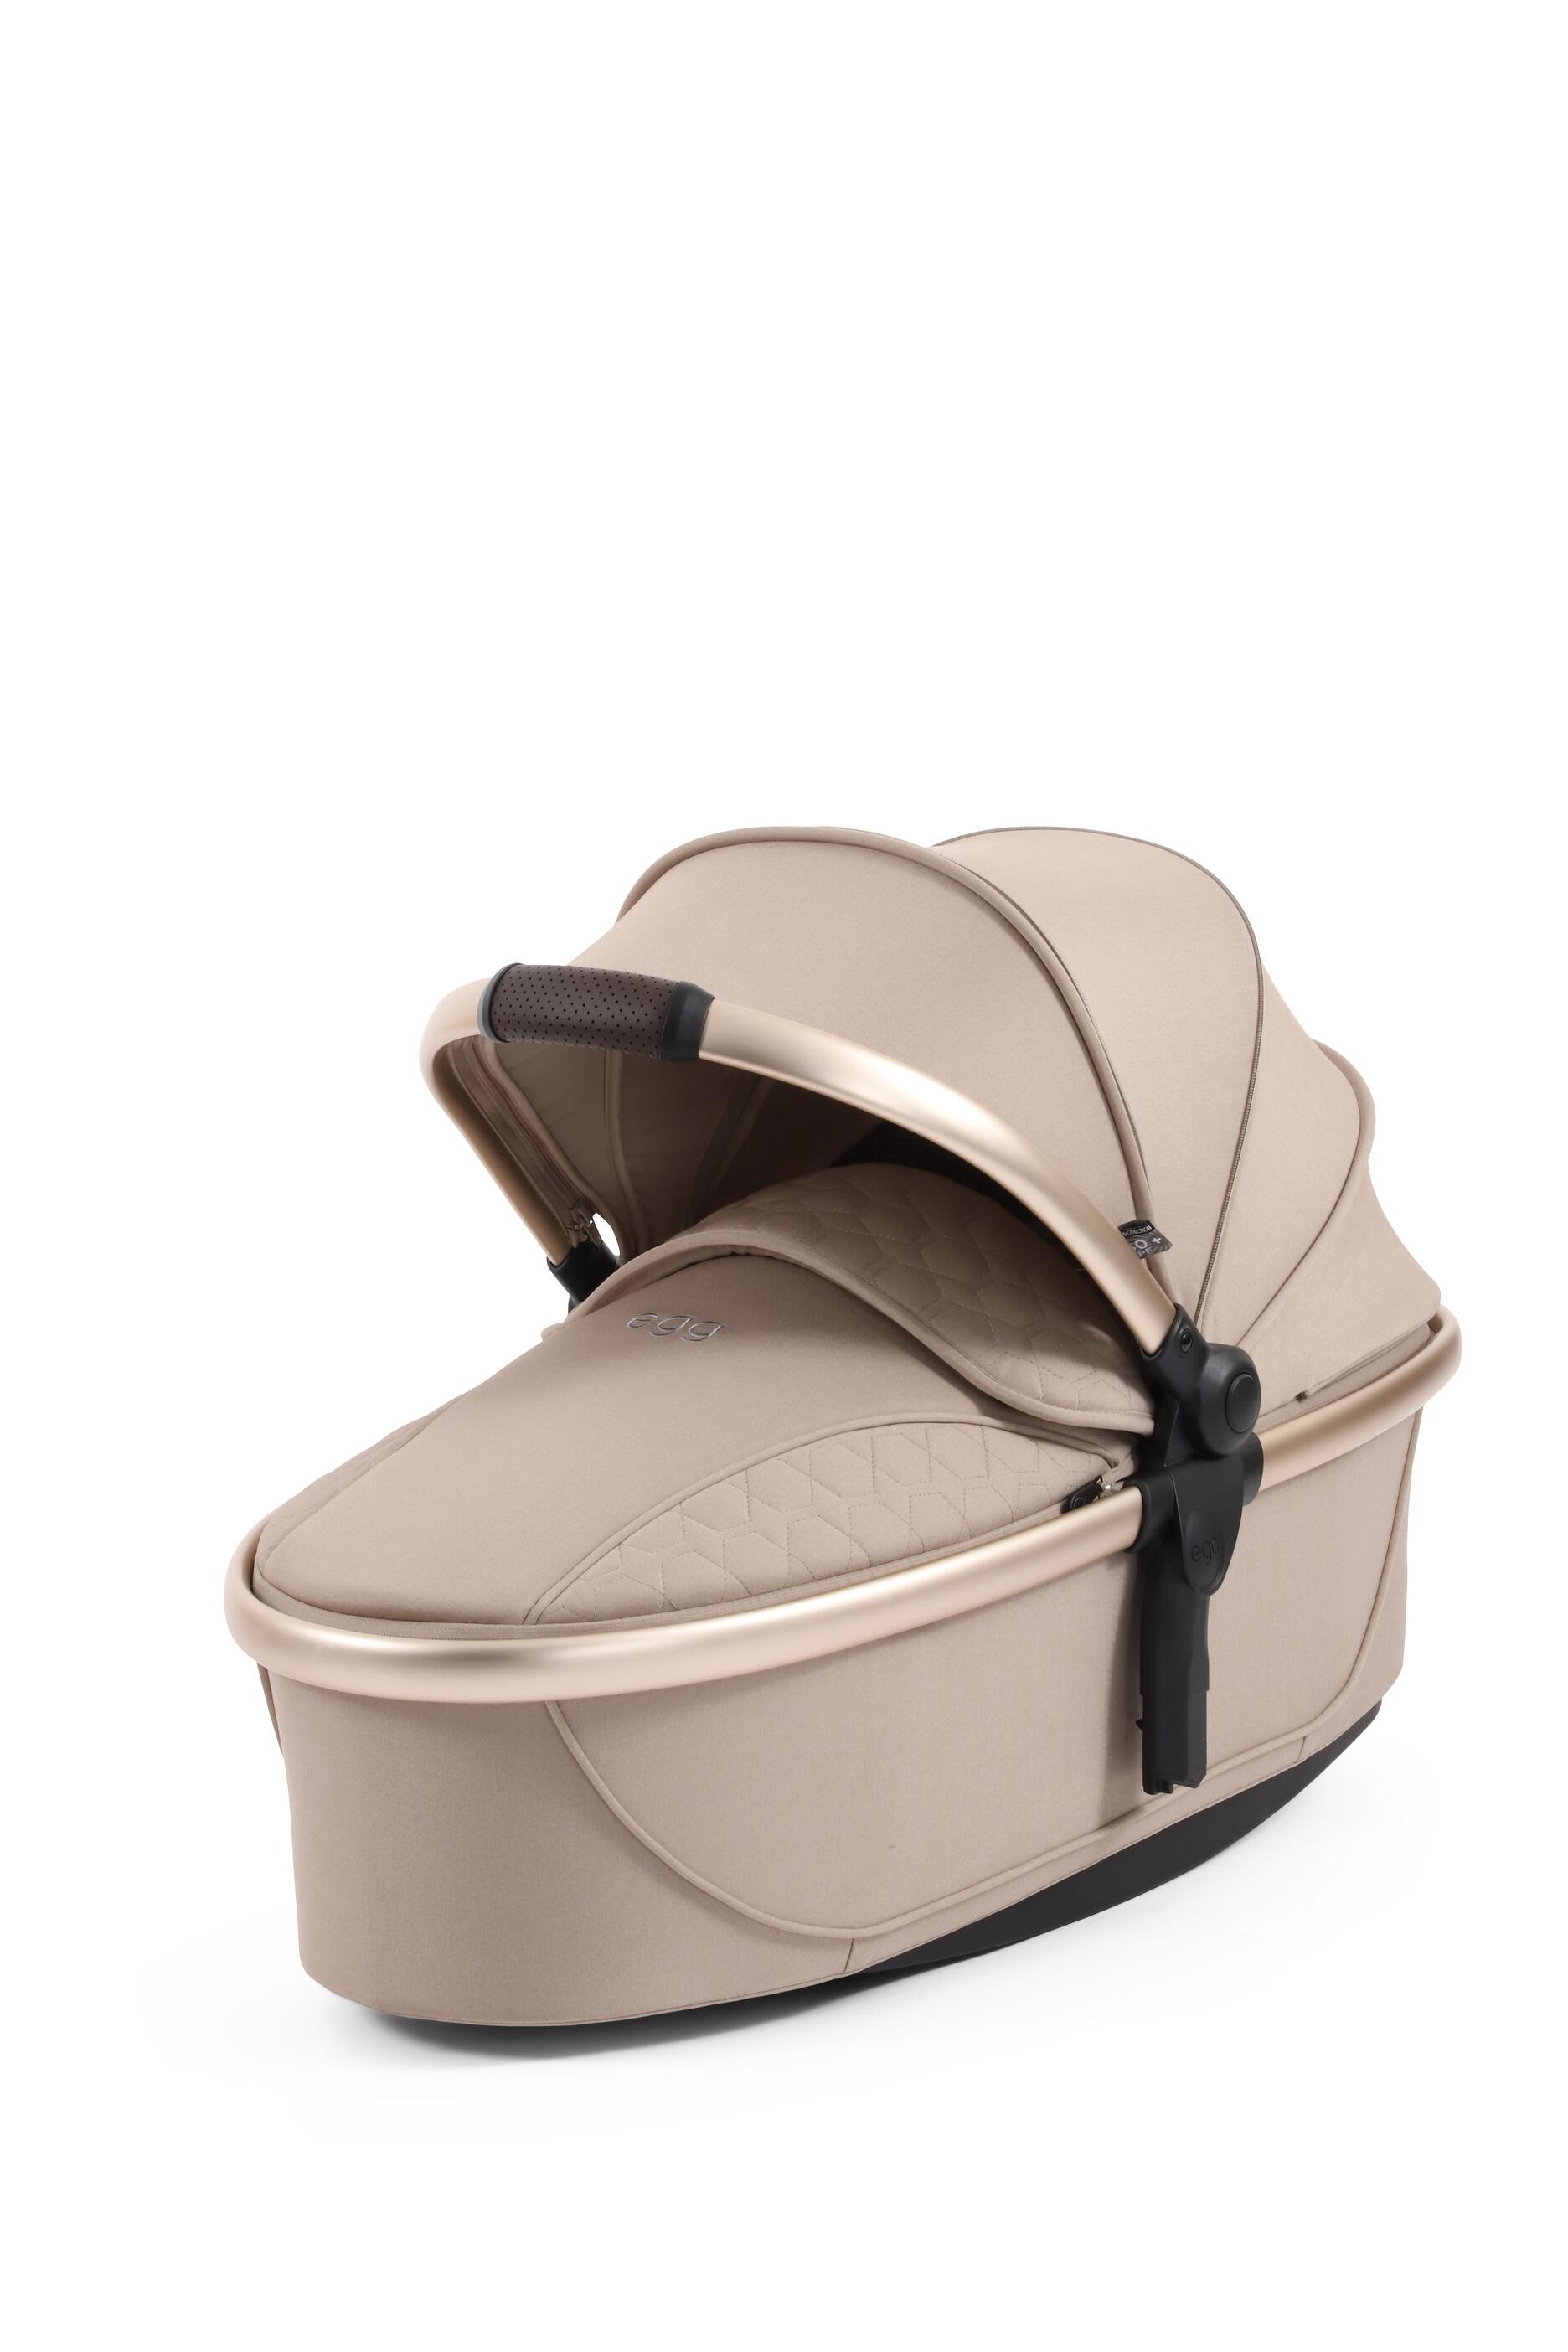 egg3-feather-carrycot-1-1.jpg